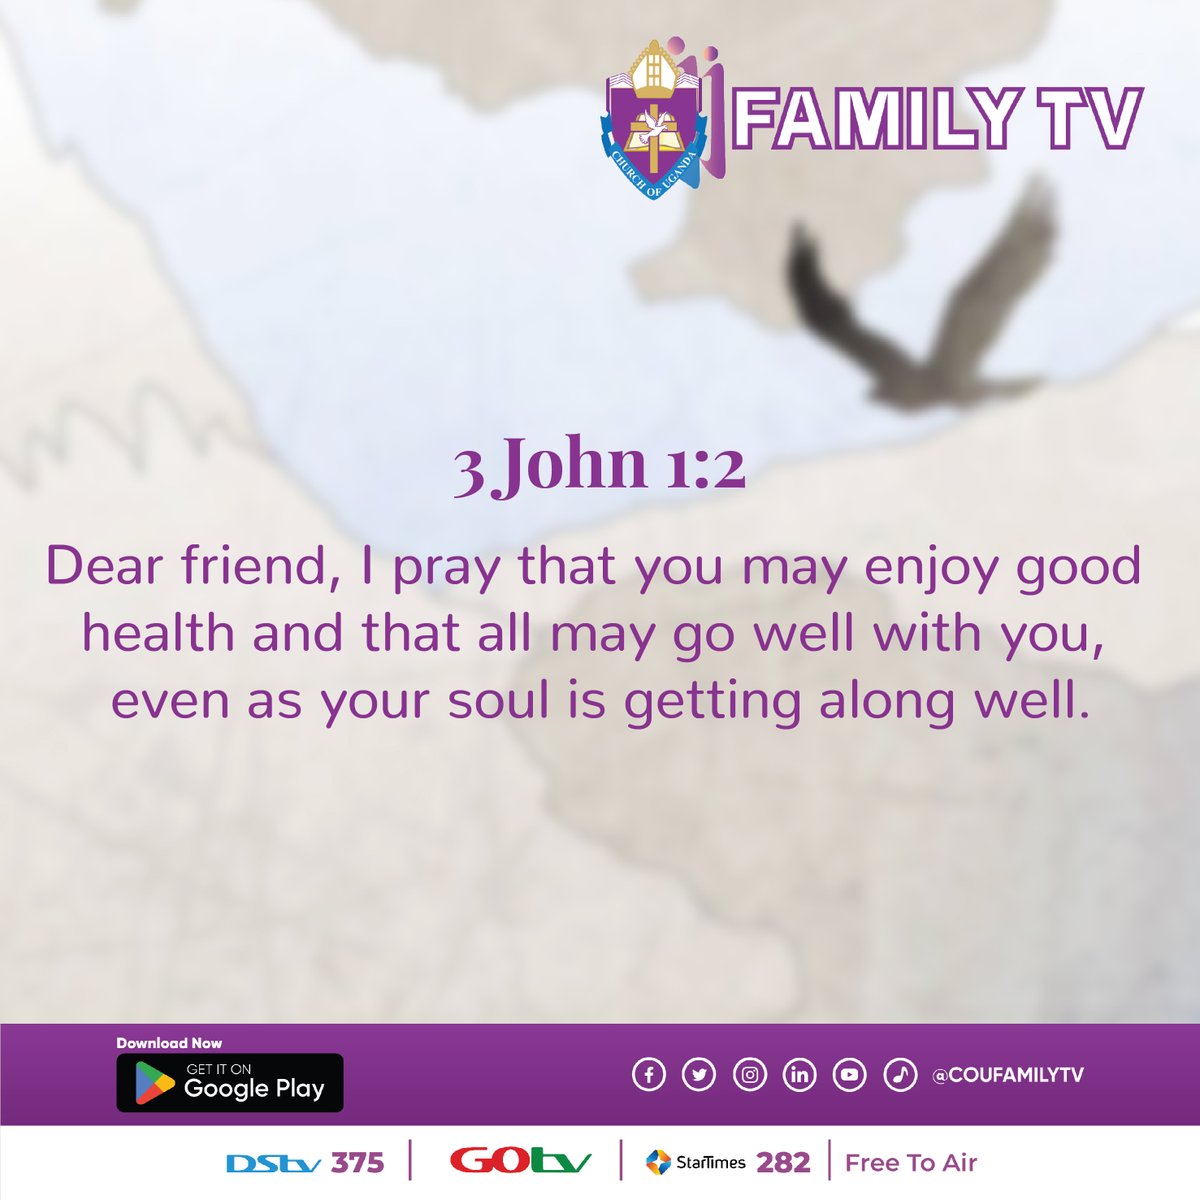 Dear friend, I pray that you may enjoy good health and that all may go well with you, even as your soul is getting along well. (3 John 1:2) NIV
#VerseoftheDay  #enrichinglives